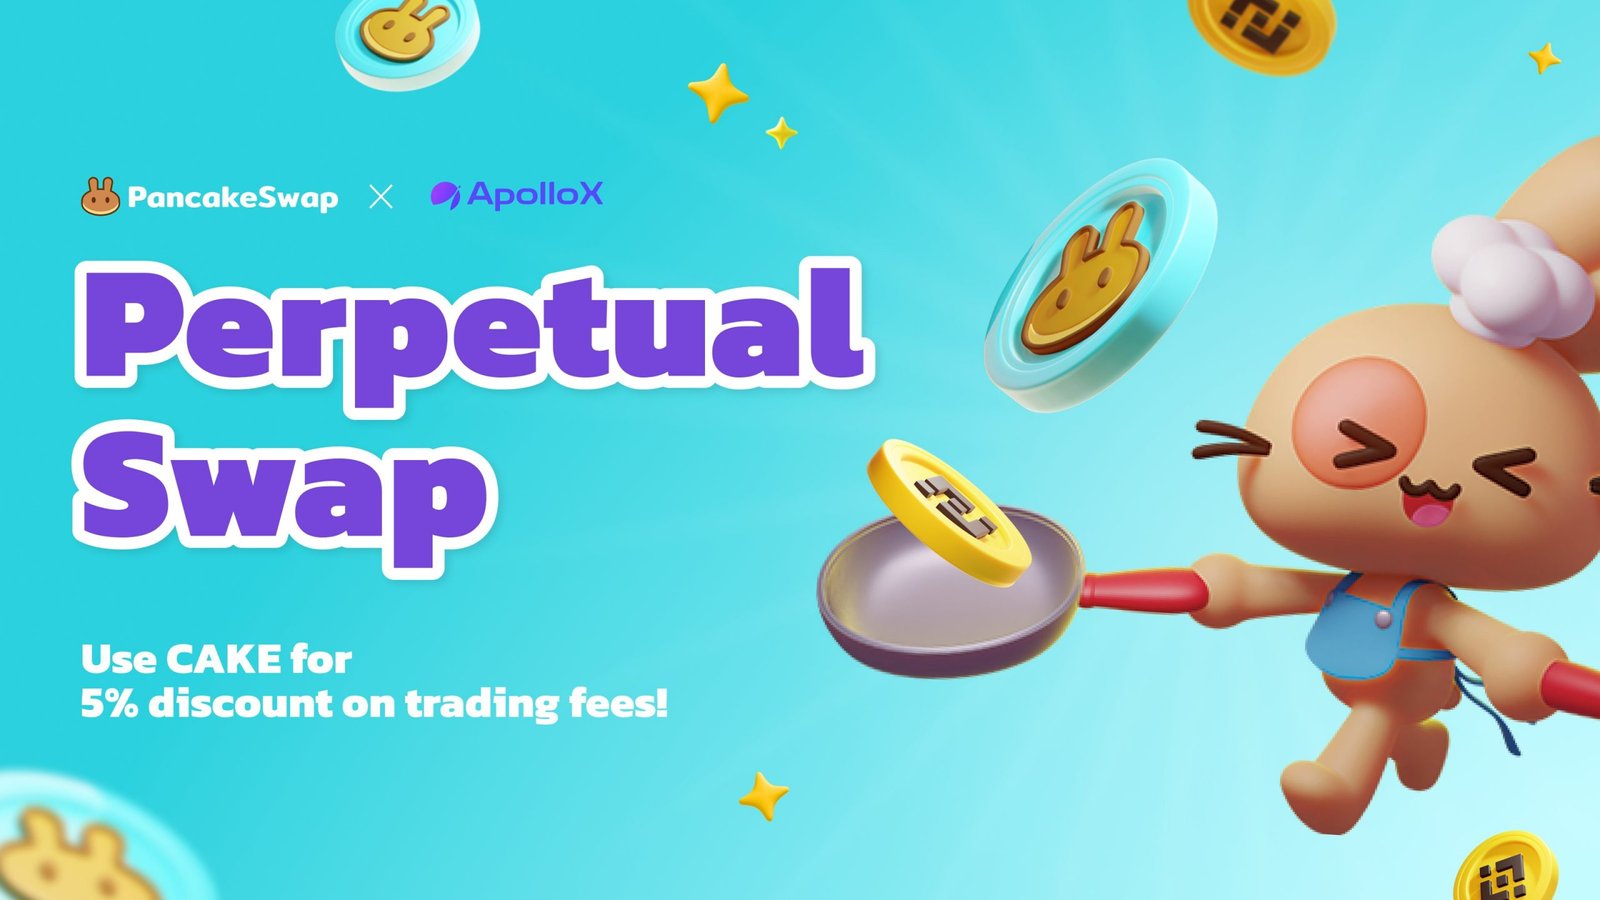 Futures Trading on DEX: PancakeSwap Opens Perpetual Trading Features 